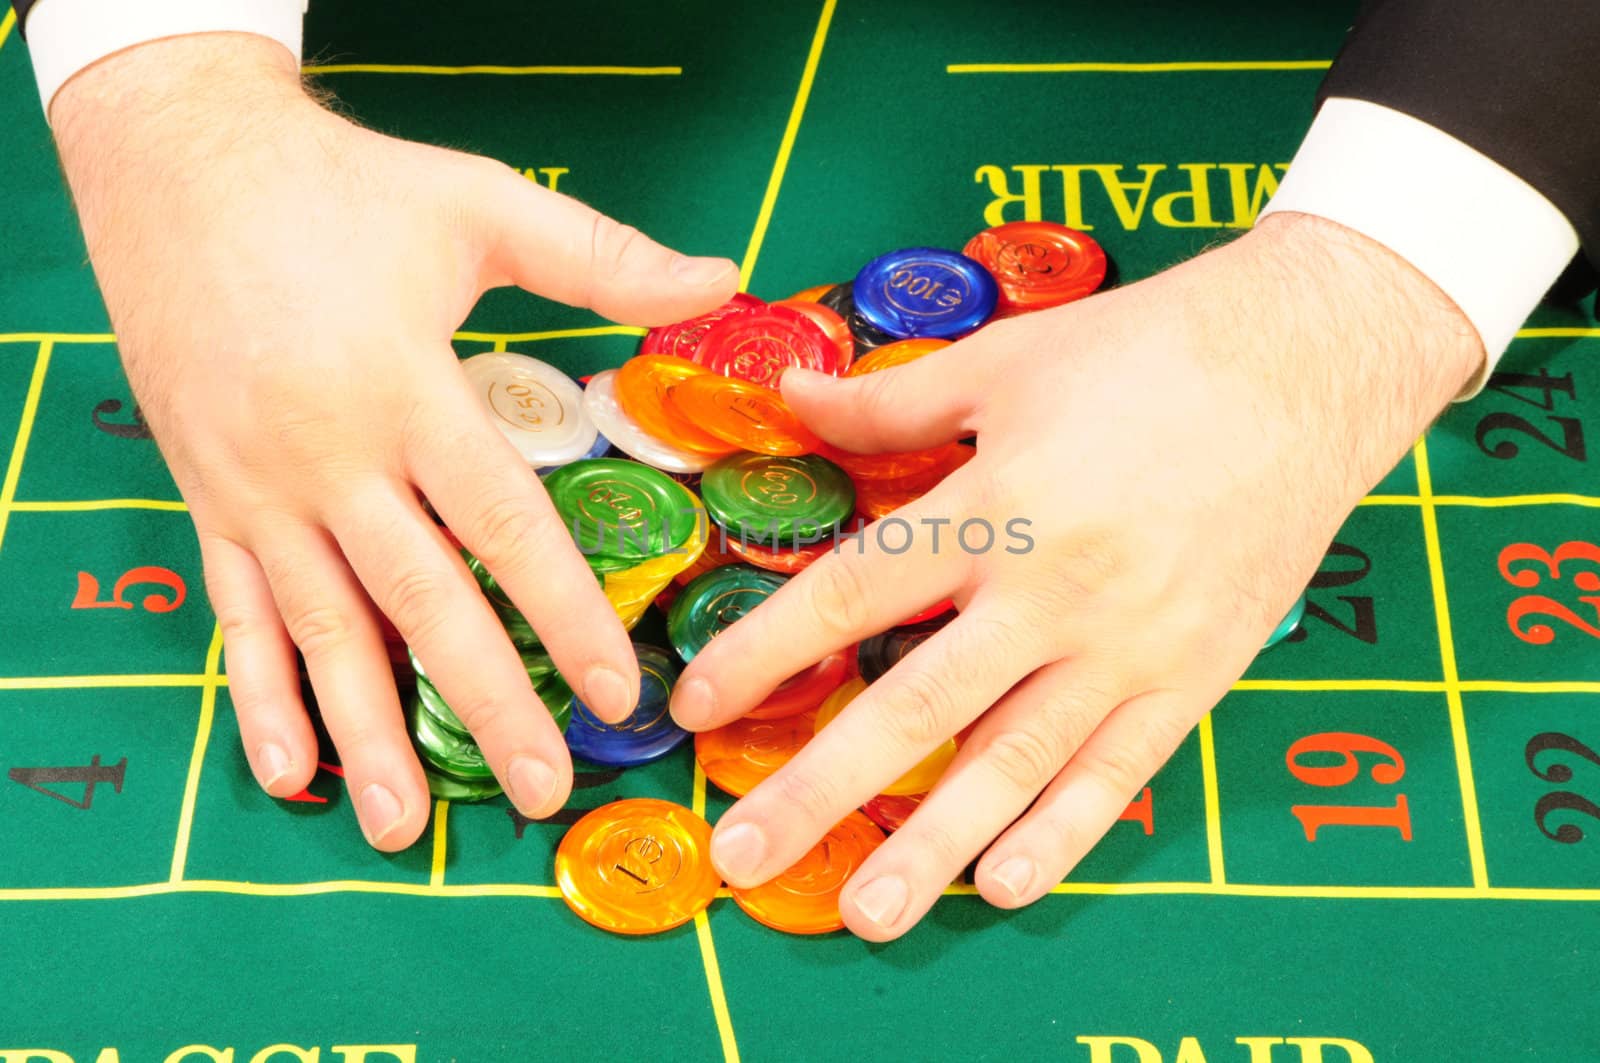 hands of the player collecting the chips won